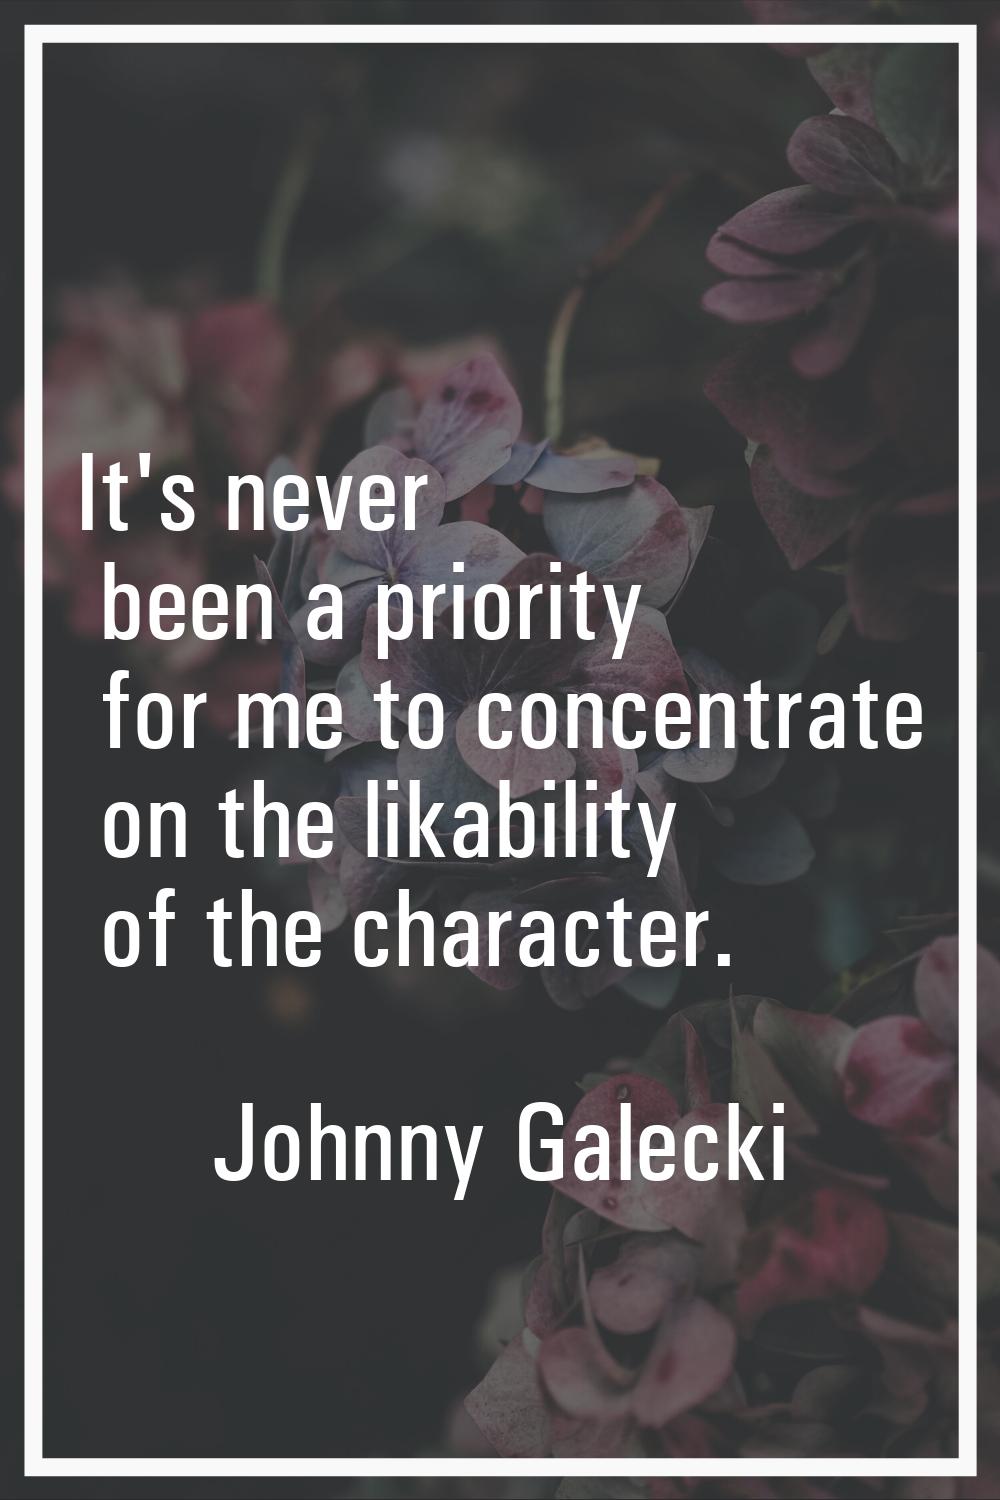 It's never been a priority for me to concentrate on the likability of the character.